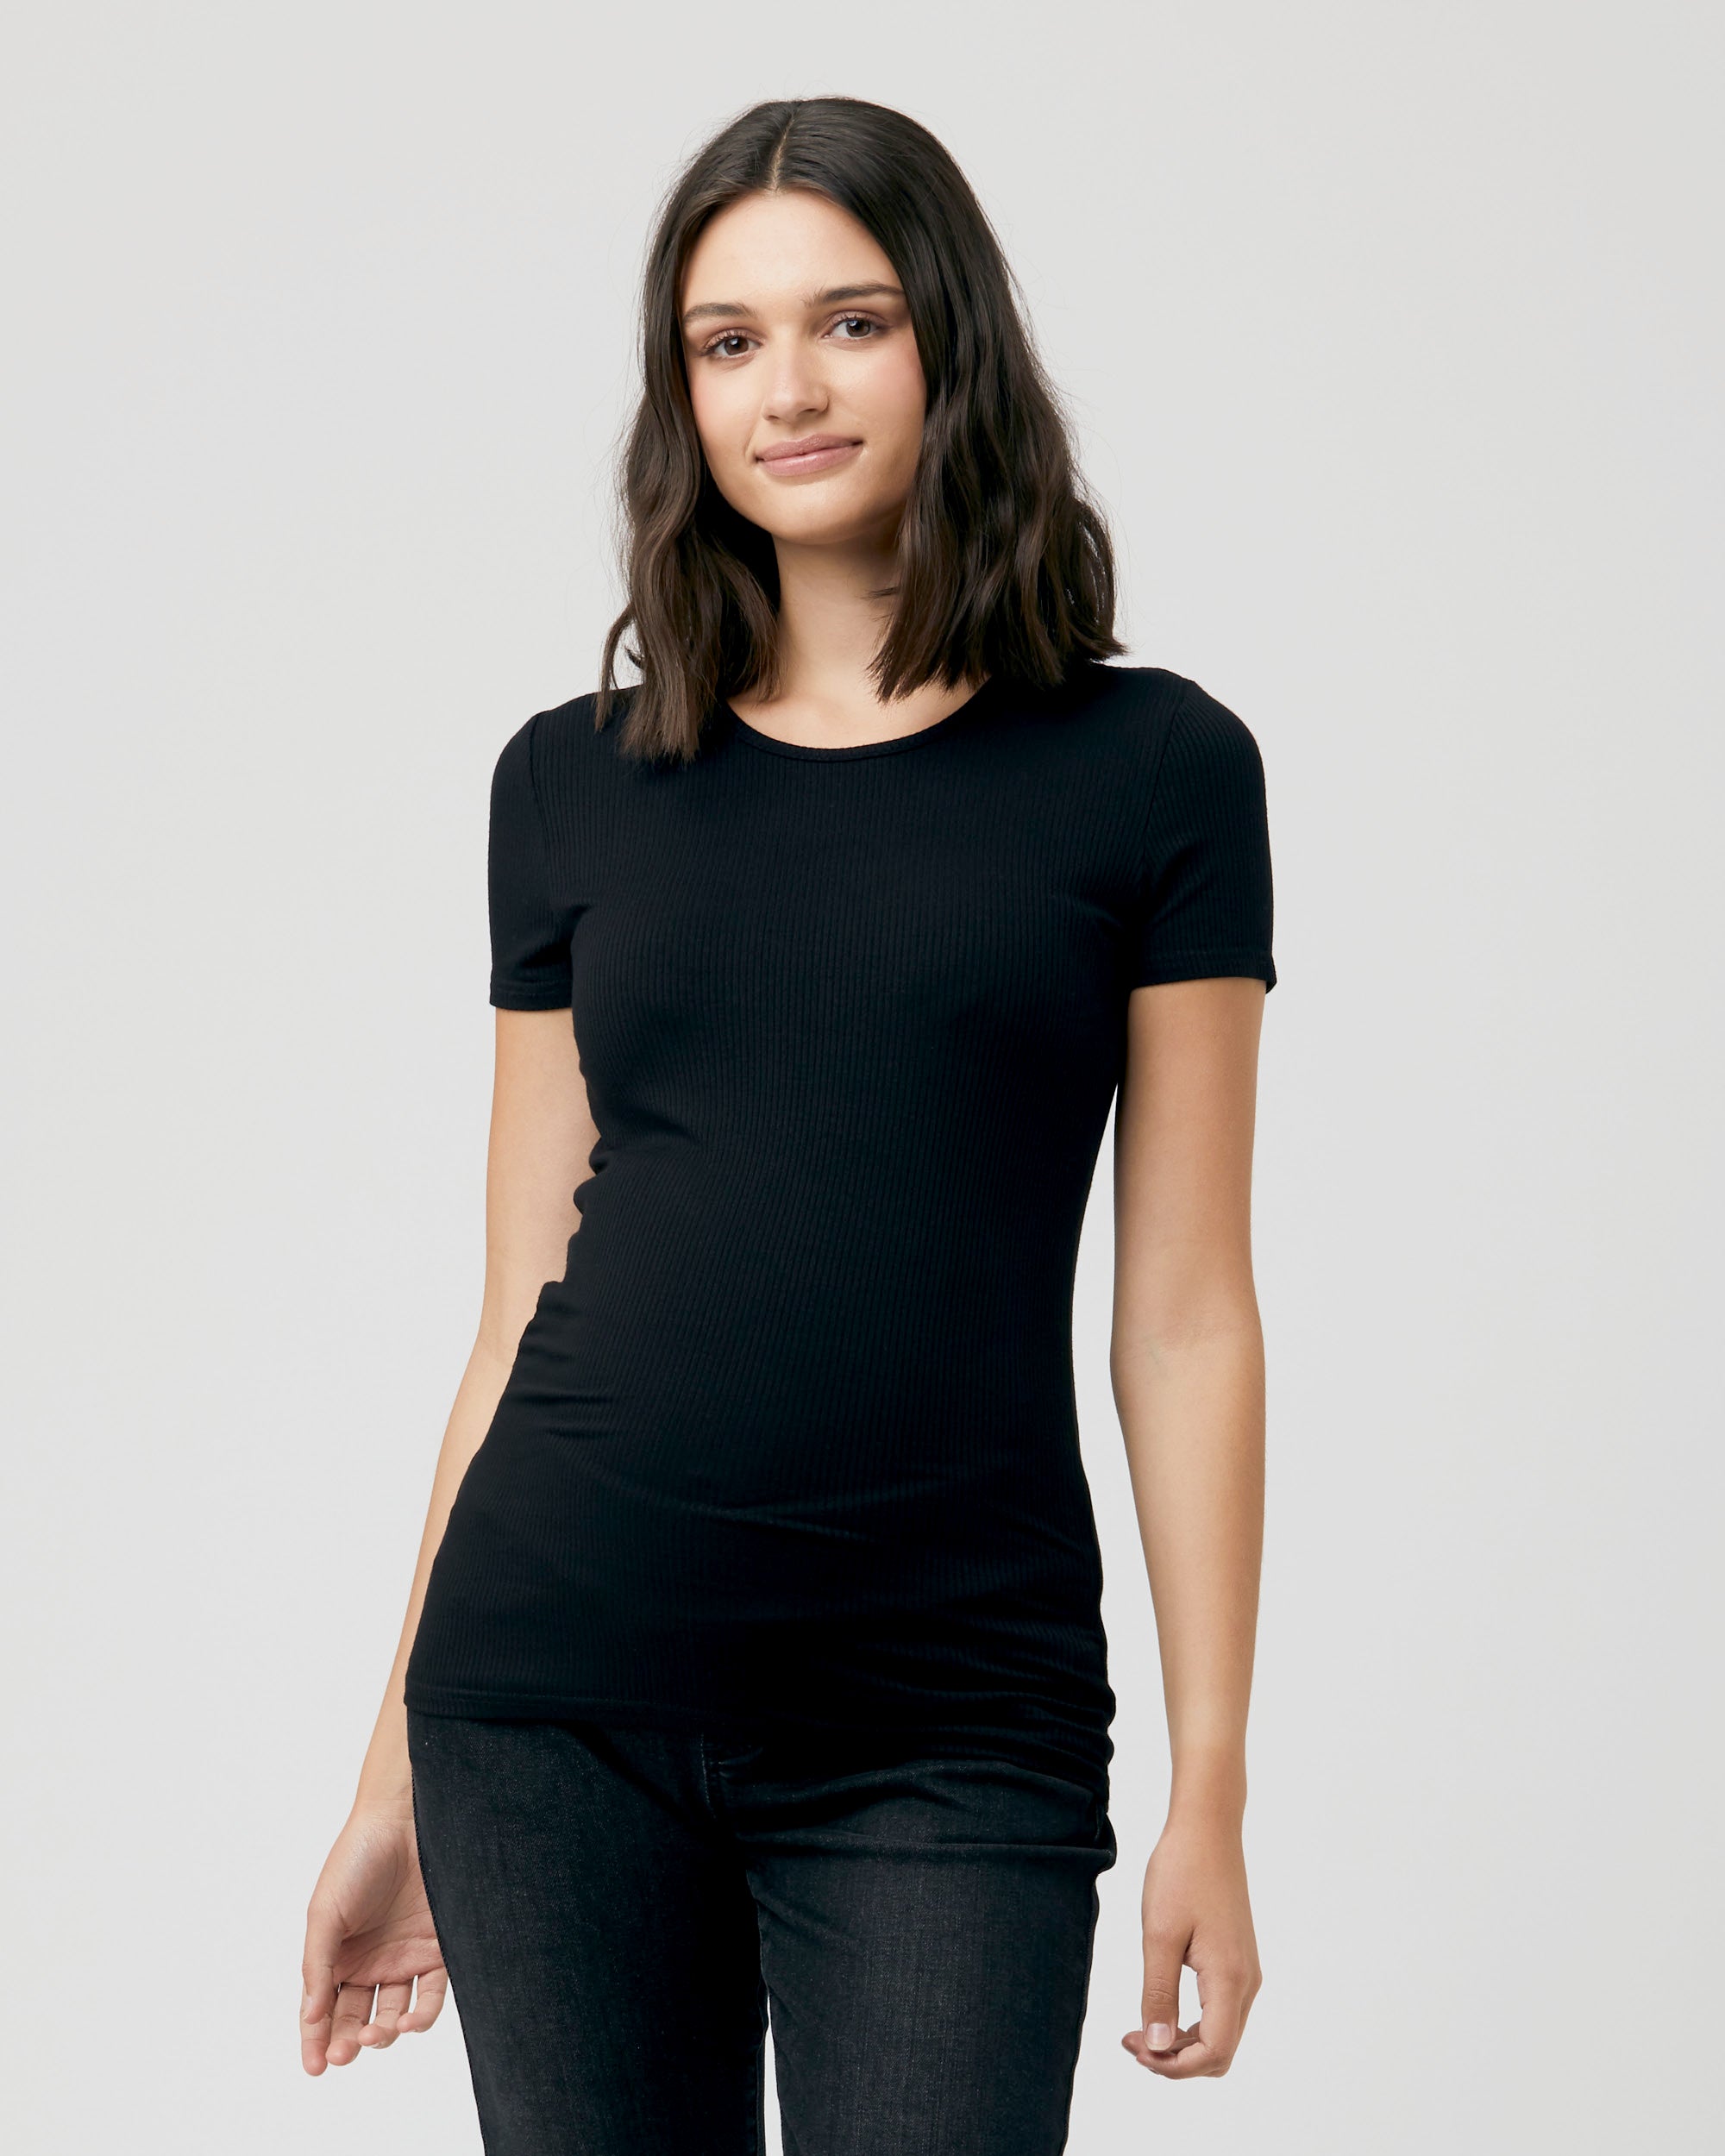 Short Sleeve Round About Tee Black